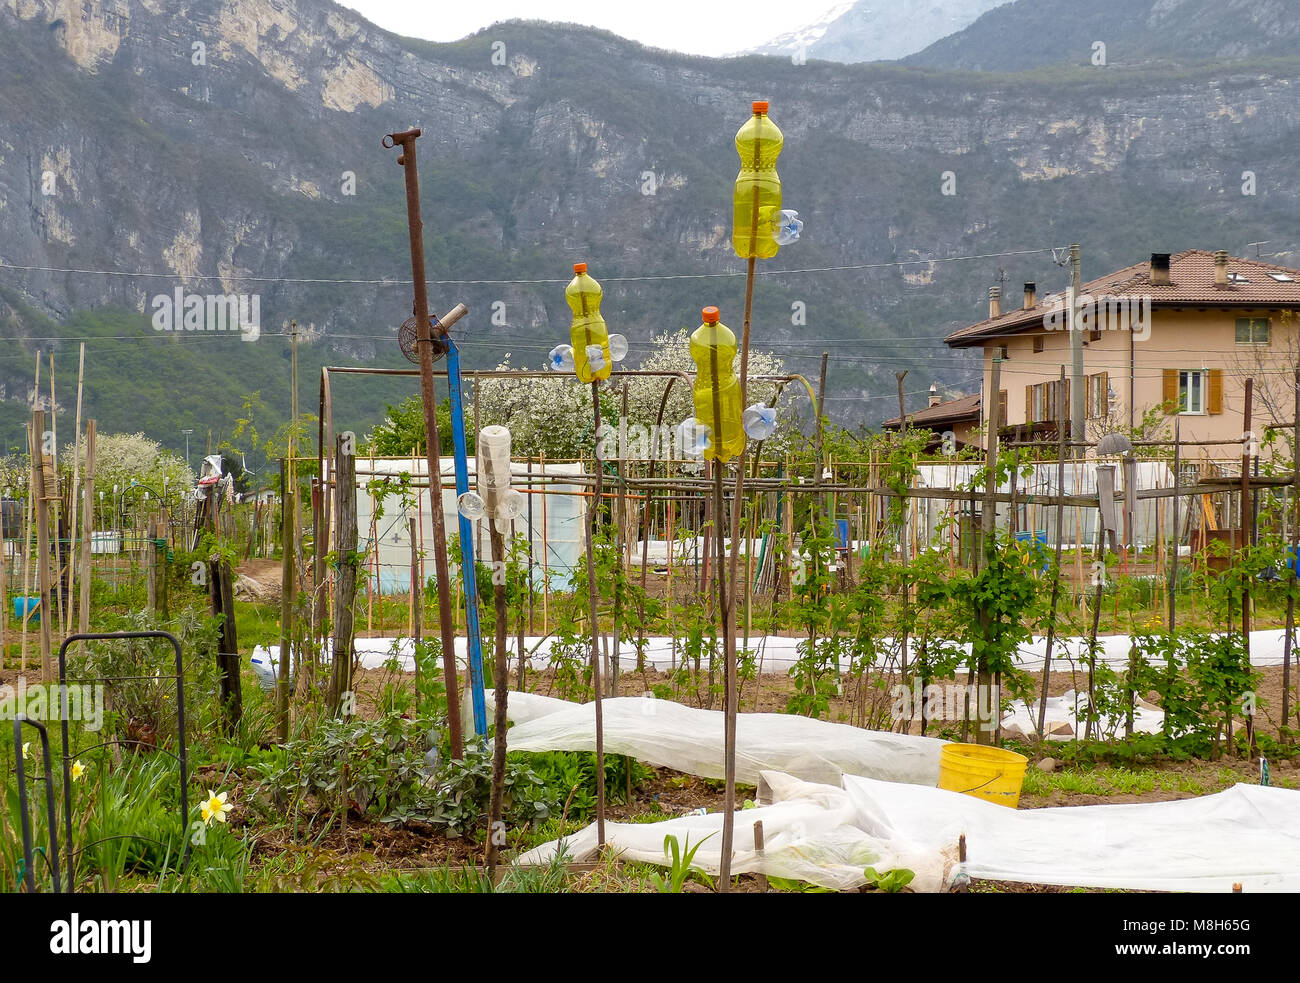 Group of Allotment plots where land is parcelled up for retirees to grow there own vegetables as a hobby - Trento, northern Italy, Europe Stock Photo